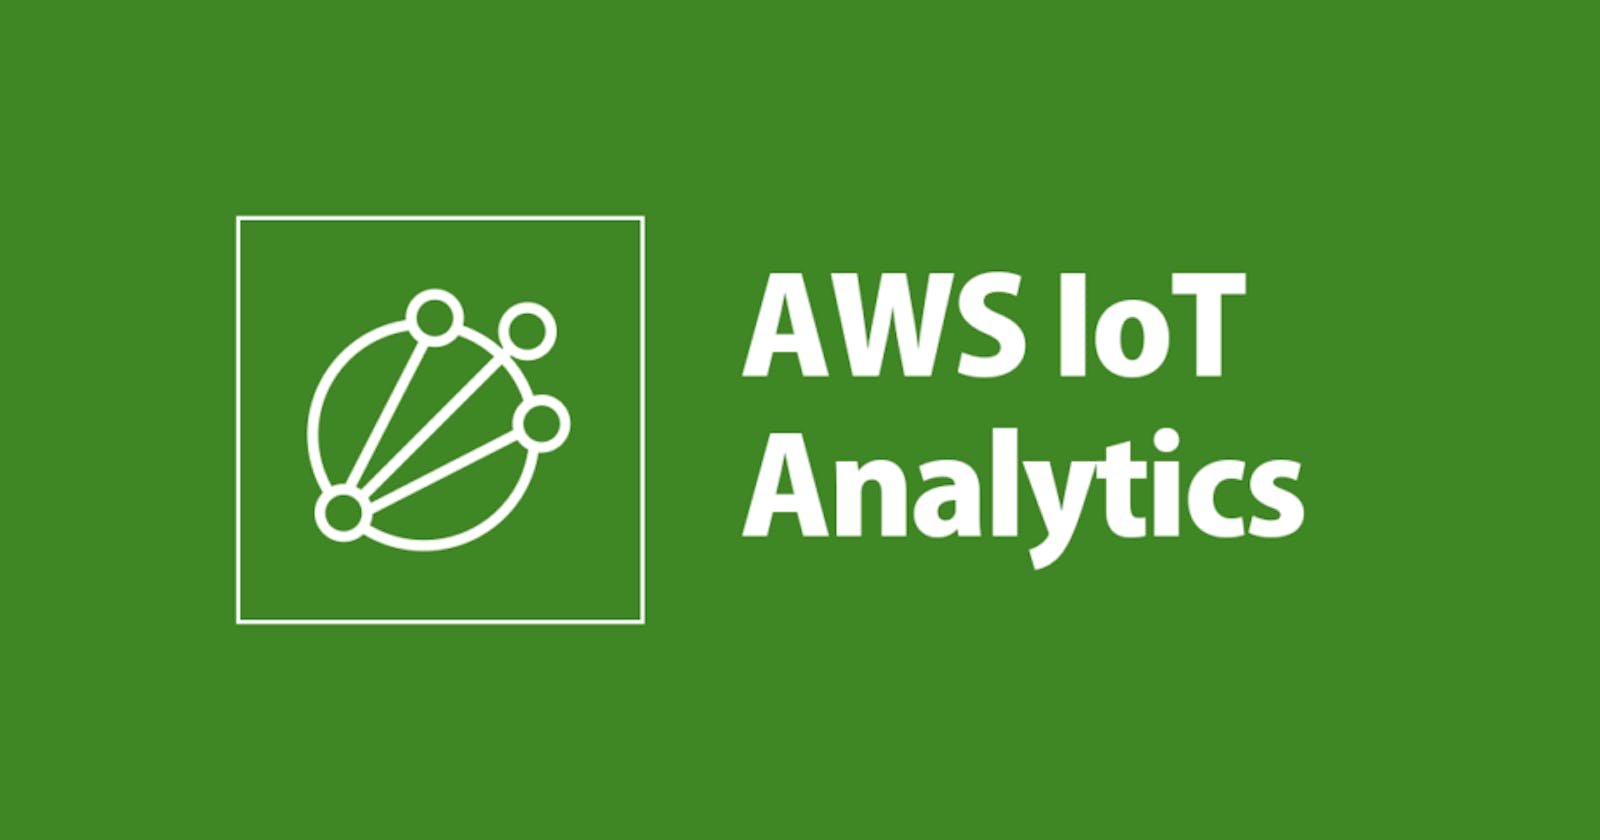 Demystifying Amazon IoT Analytics Services in AWS: A Beginner's Guide with Examples